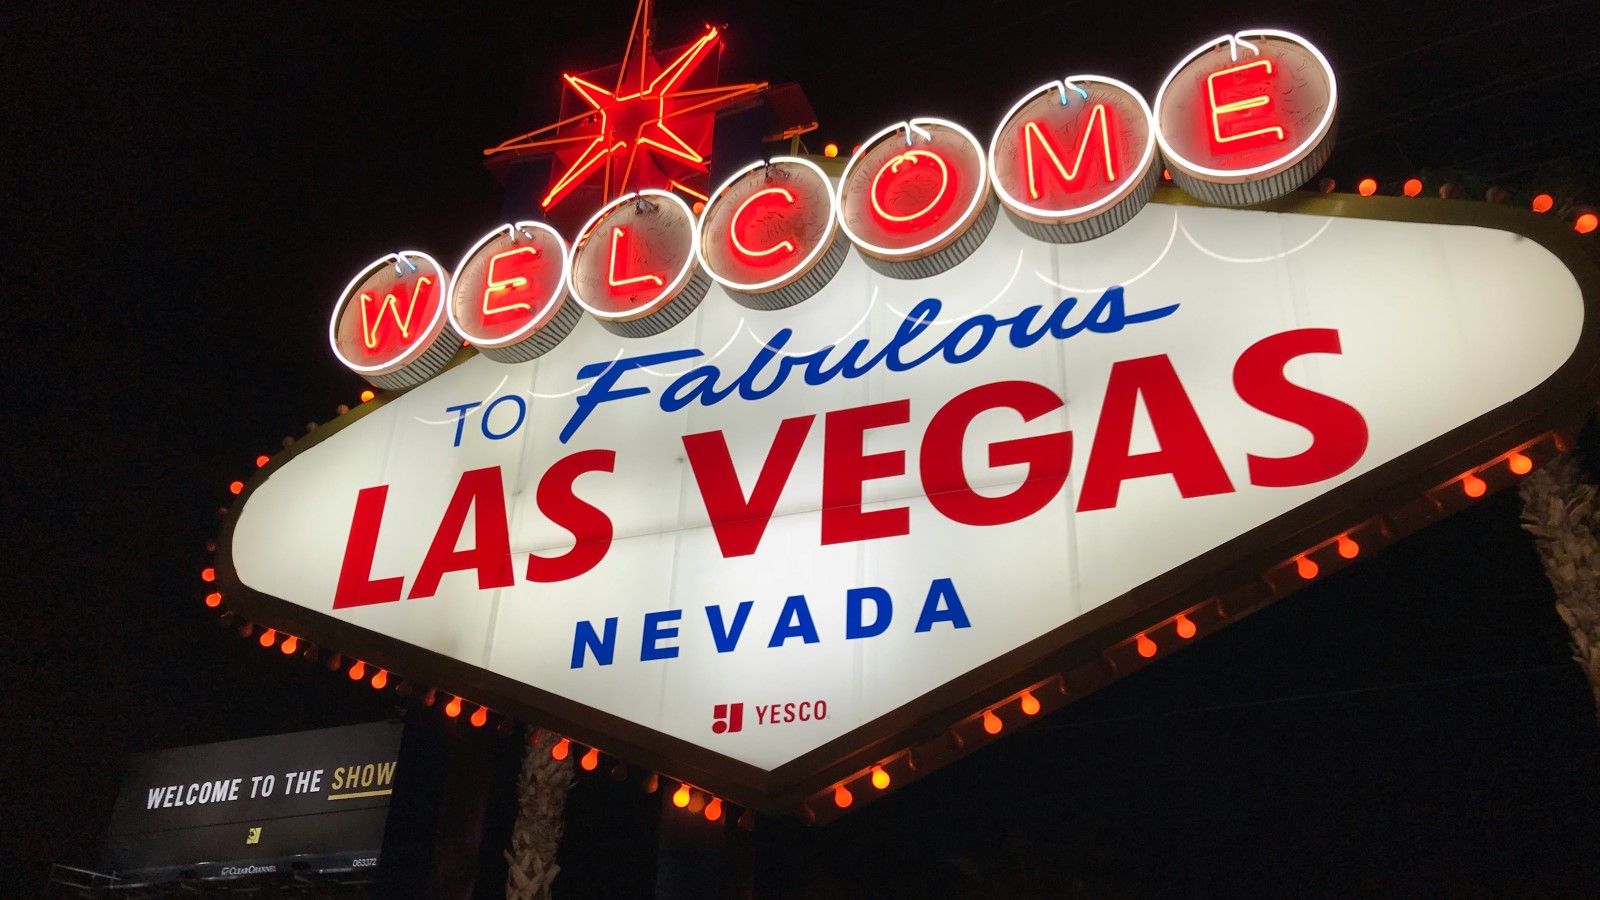 Are There Any Special Laws on the Las Vegas Strip?